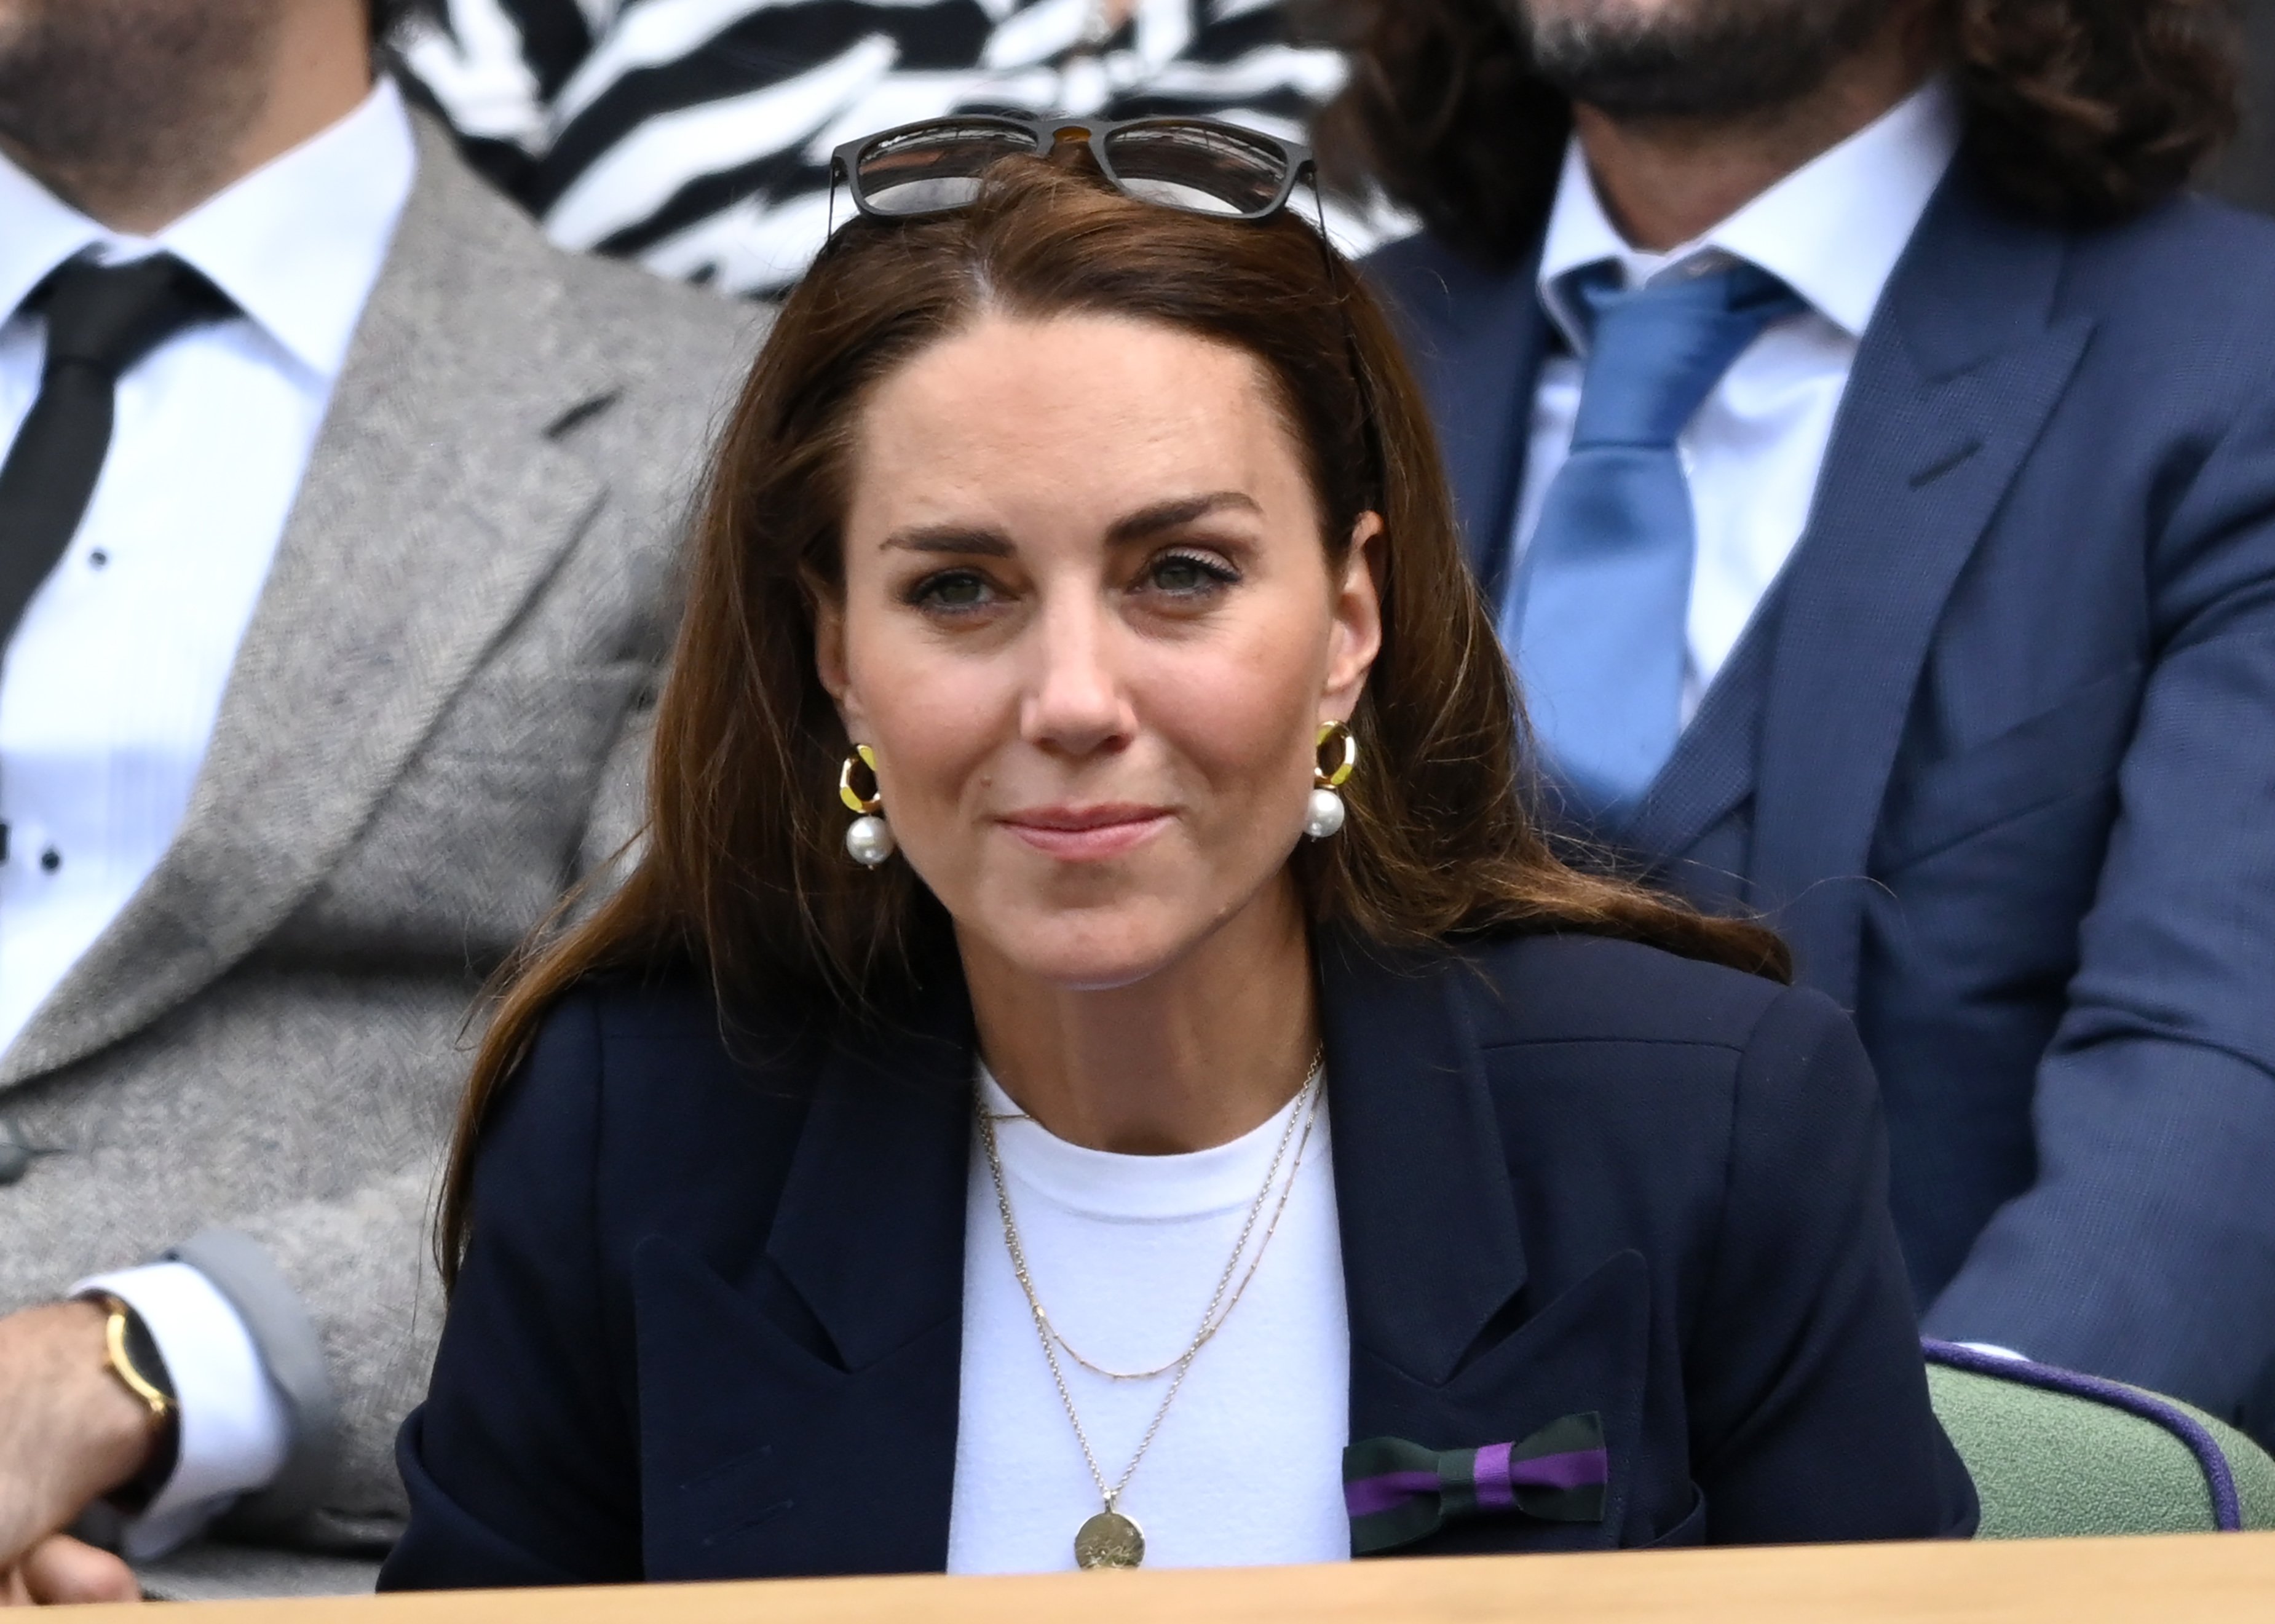 Duchess of Cambridge Kate Middleton on July 2 2021 in London England | Source Getty Images